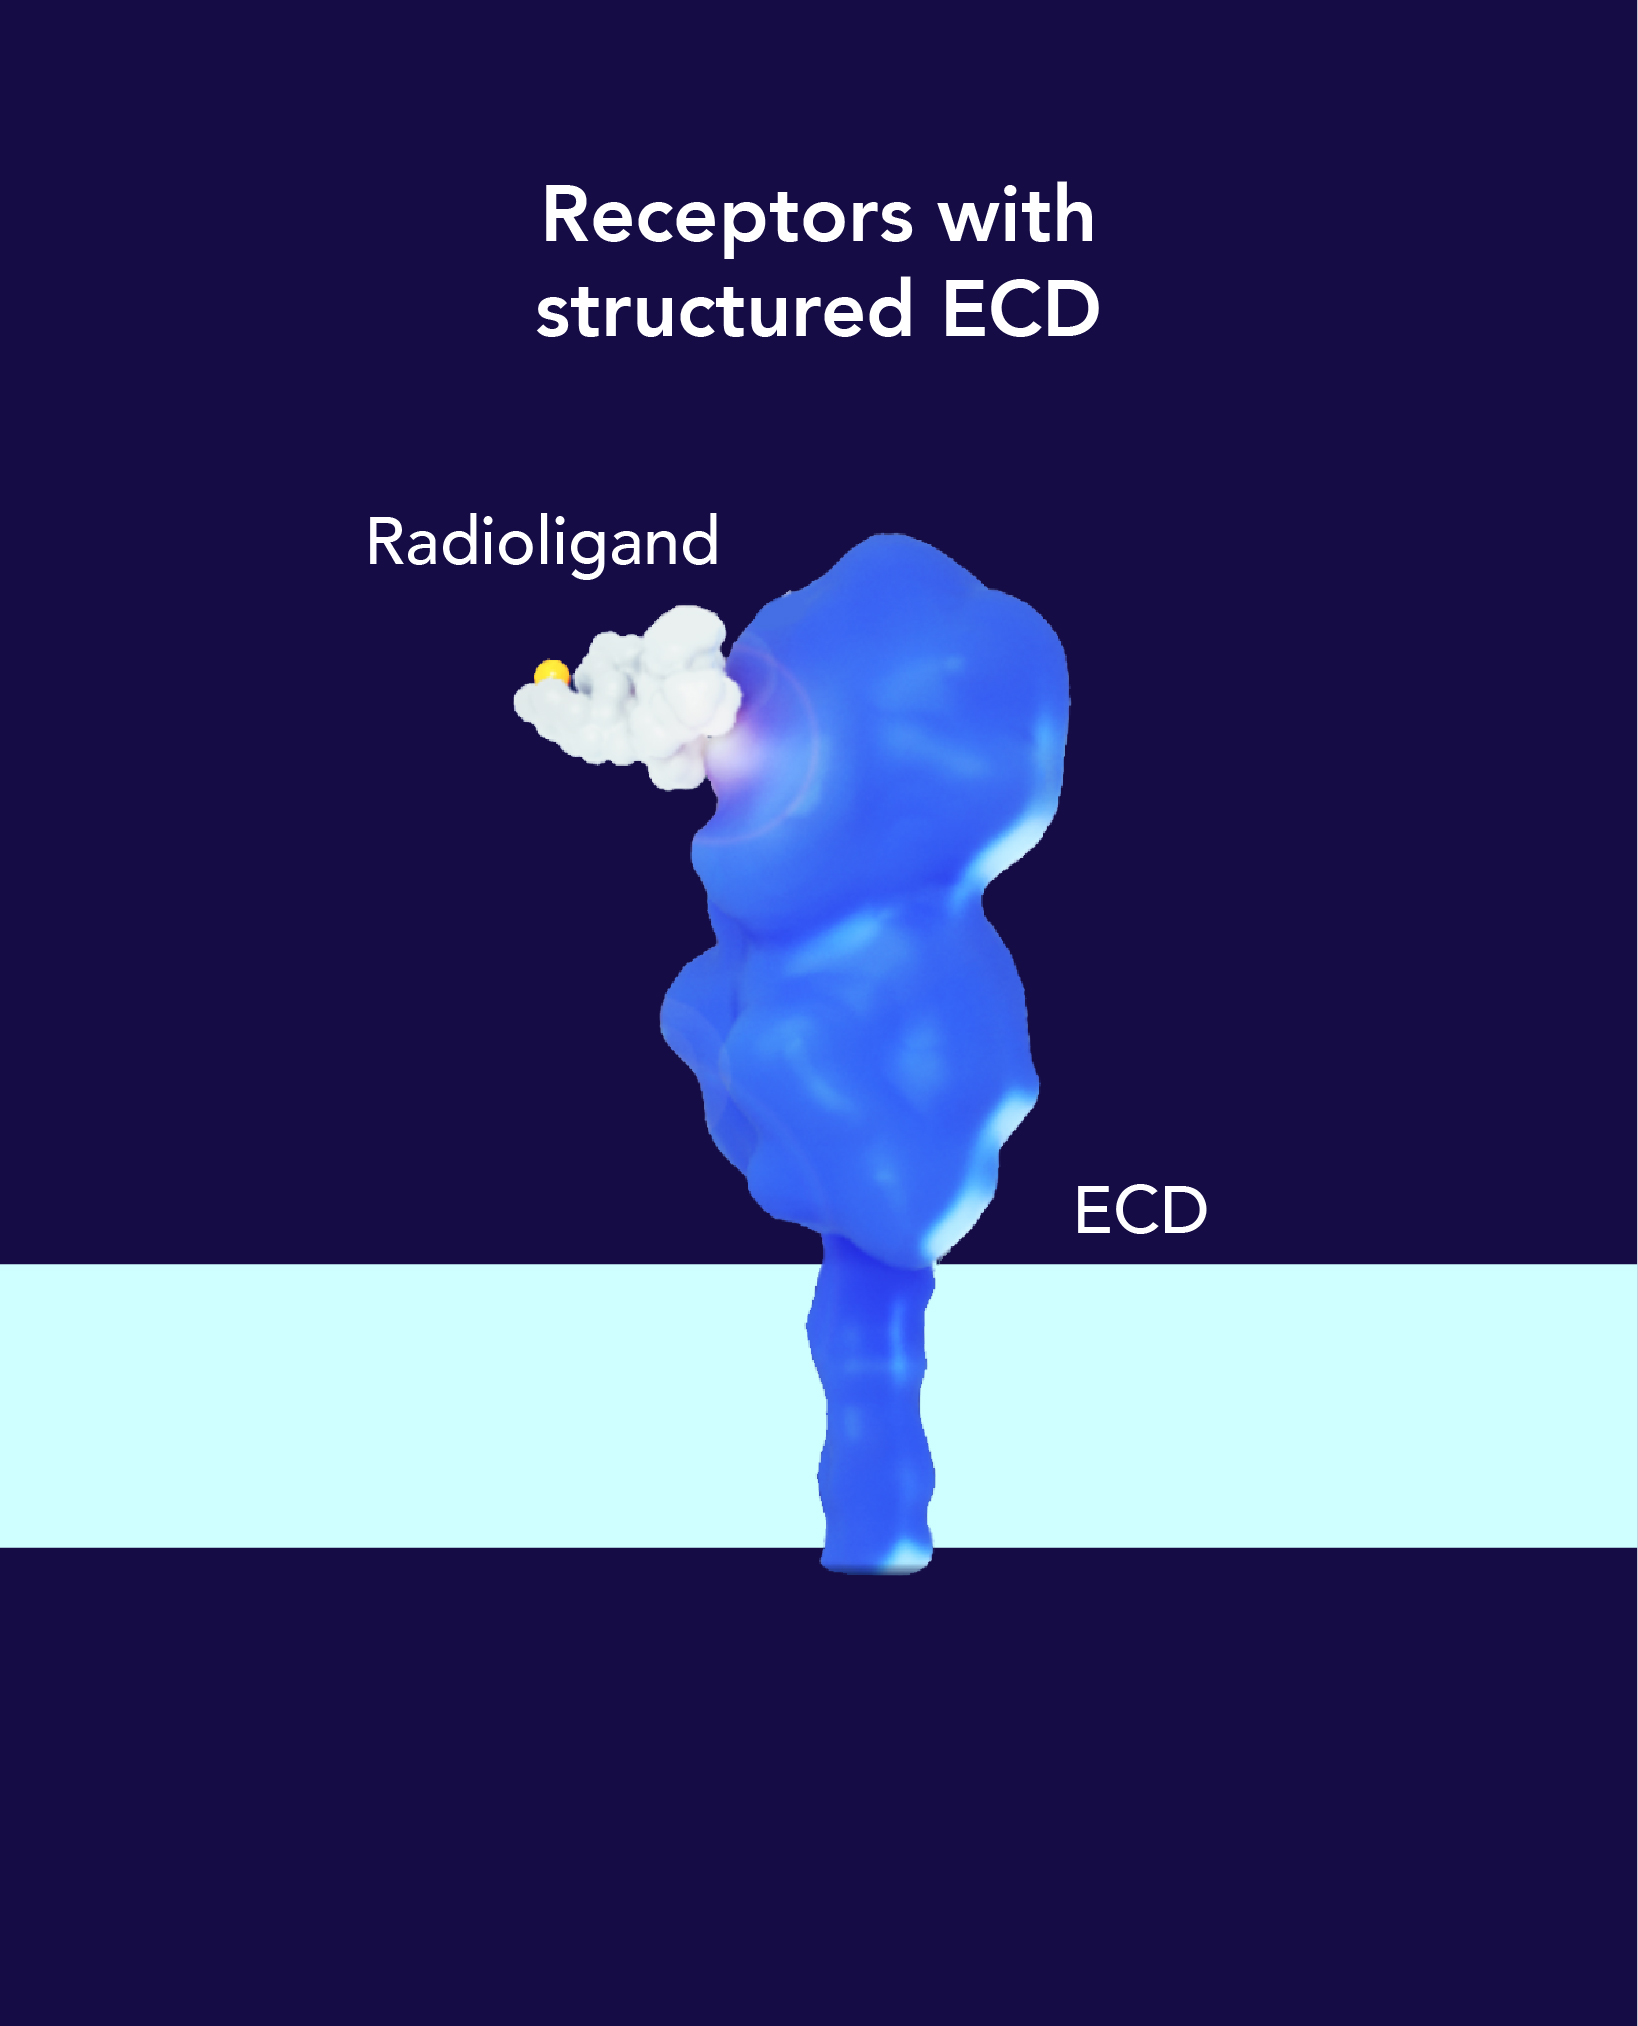 Receptors with structured ECD